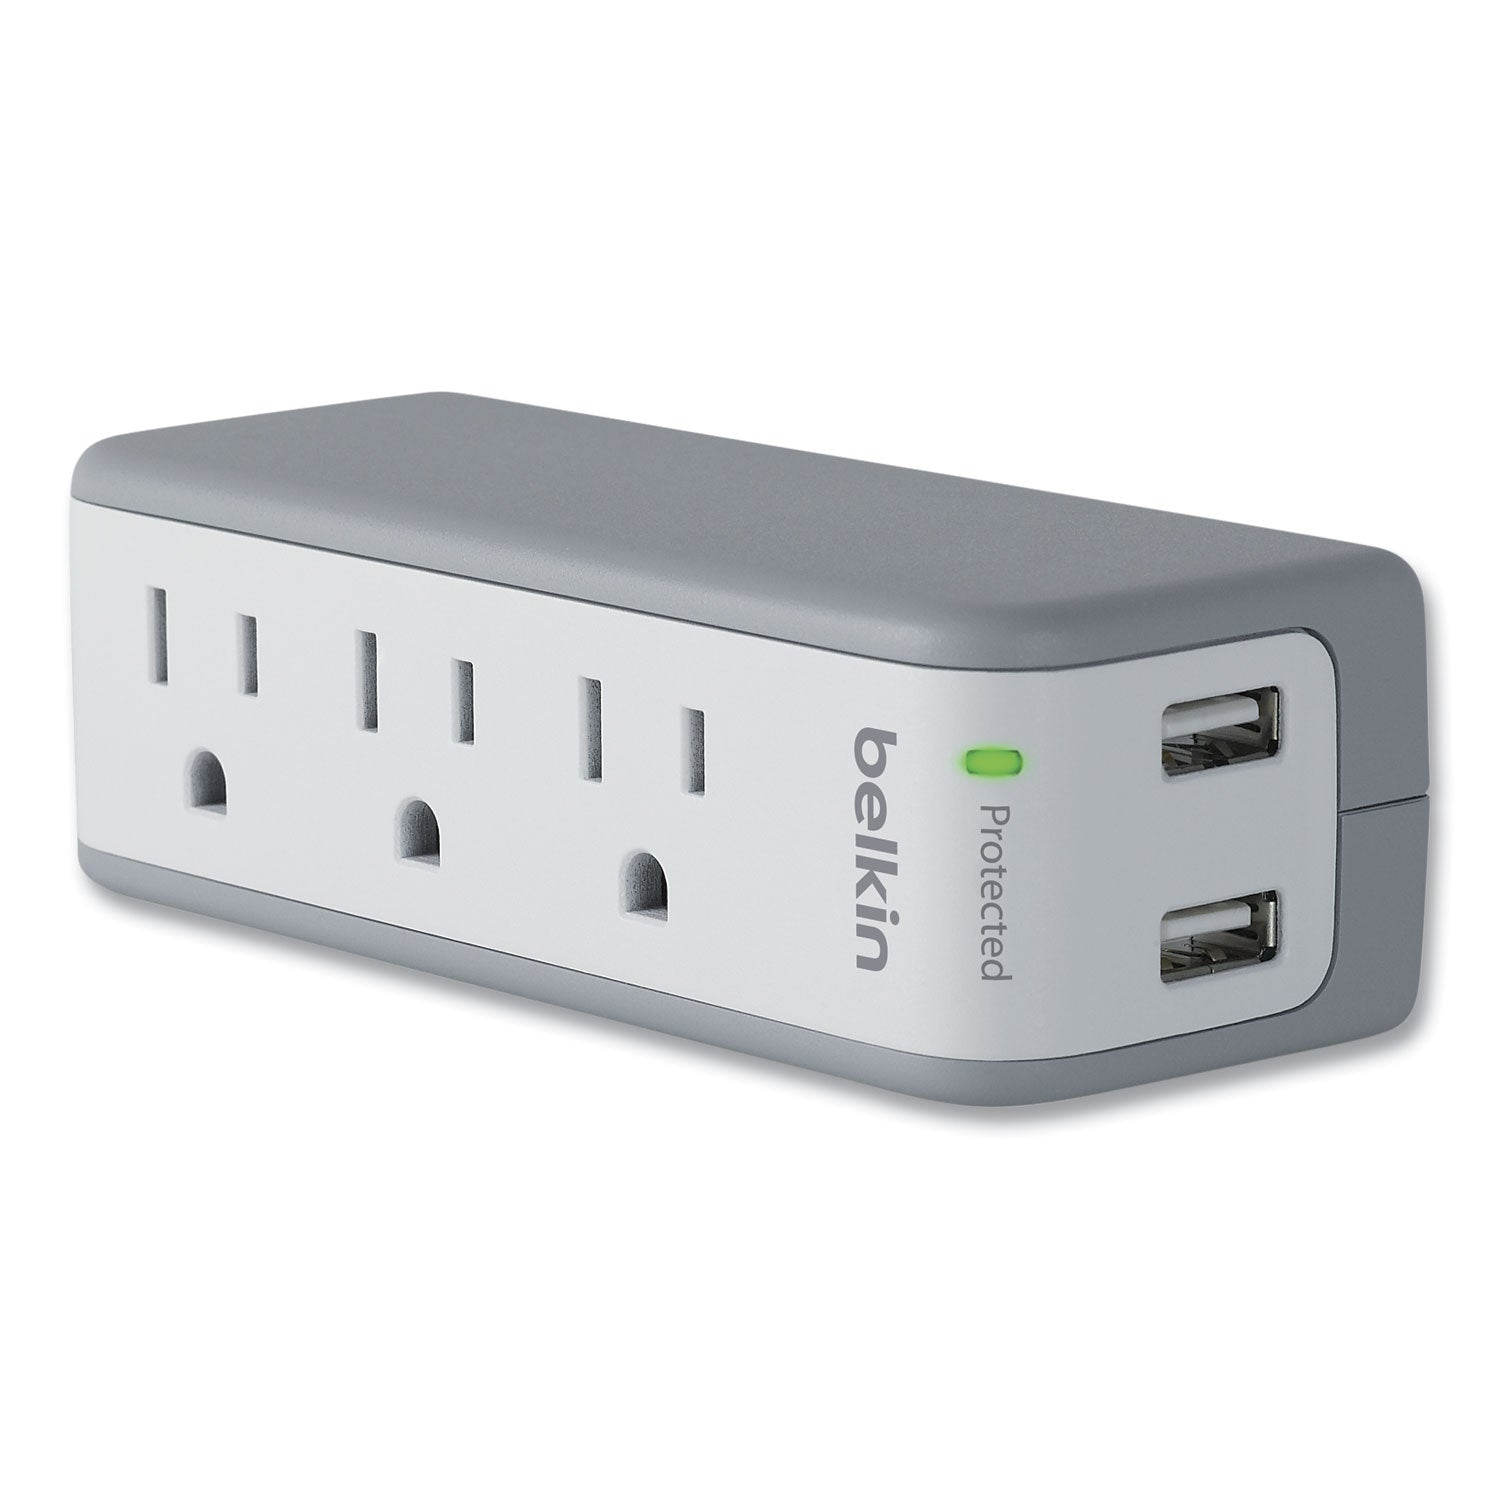 Belkin 3-Outlet Mini Surge Protector with USB Ports (2.1 AMP) - 3 x NEMA 5-15R, 2 x USB - 918 J - 120 V AC Input - 120 V AC, 5 V DC Output - 36 kA - External - 1